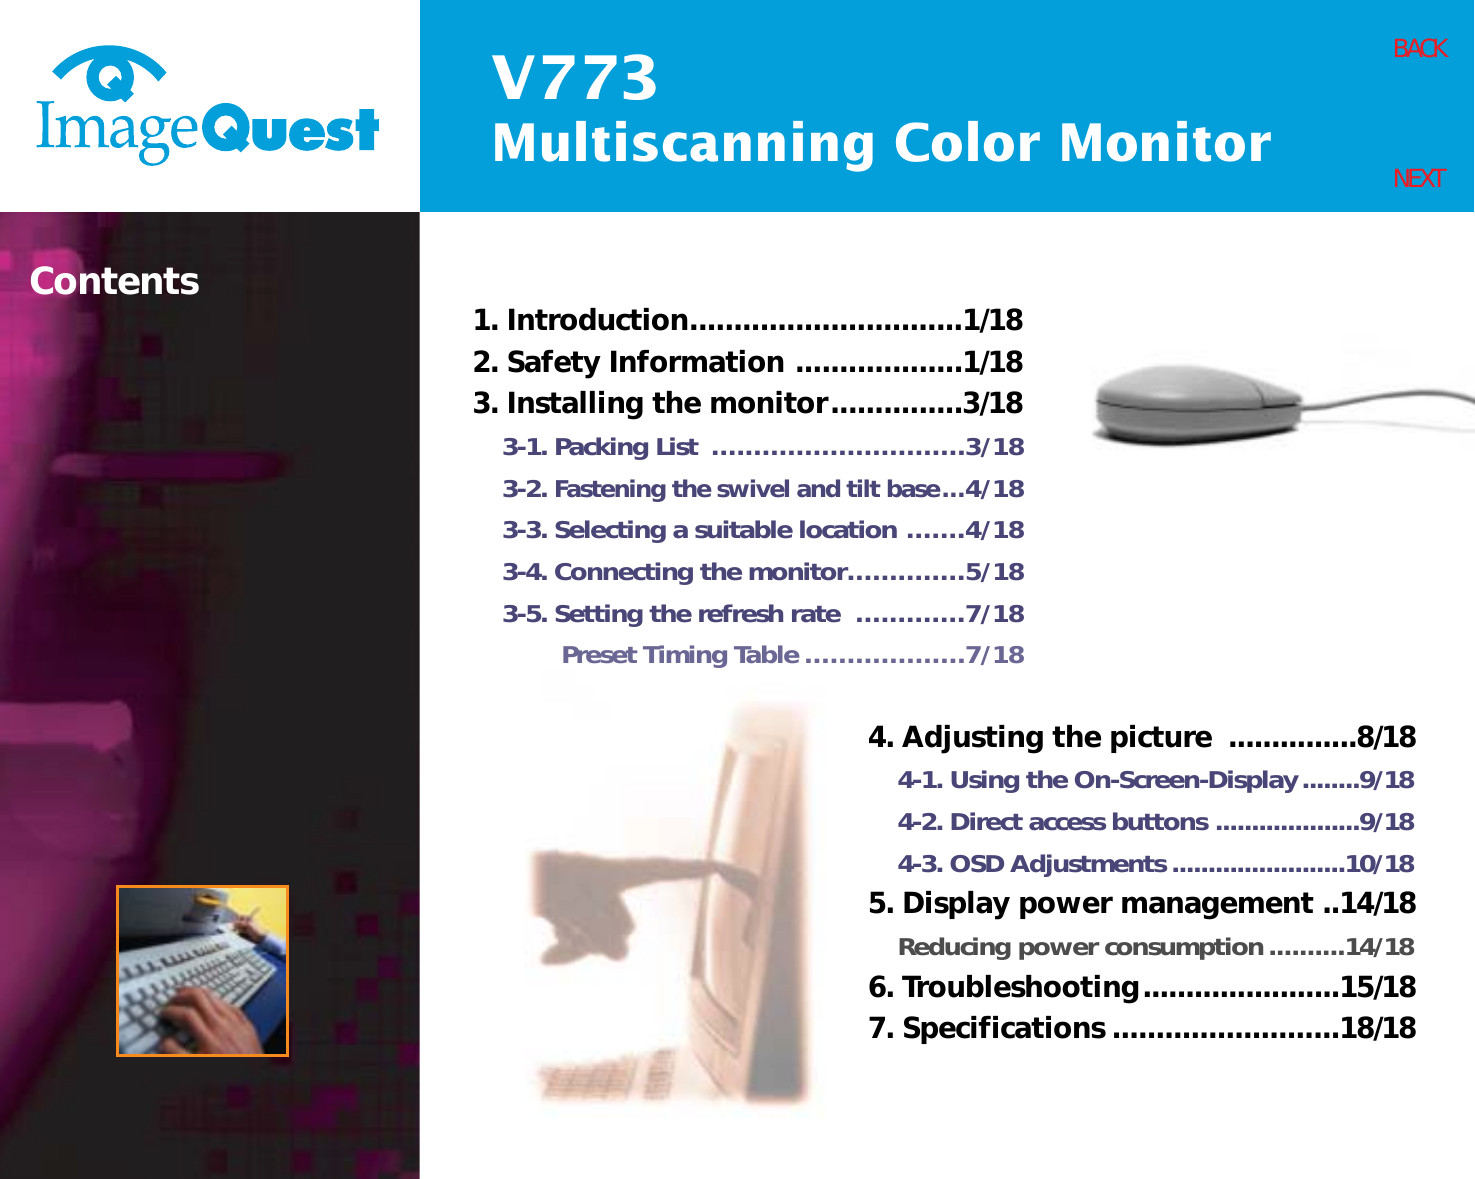 V773Multiscanning Color MonitorBACKNEXTContents 1. Introduction...............................1/182. Safety Information ...................1/183. Installing the monitor...............3/183-1. Packing List  ..............................3/183-2. Fastening the swivel and tilt base...4/183-3. Selecting a suitable location .......4/183-4. Connecting the monitor..............5/183-5. Setting the refresh rate  .............7/18Preset Timing Table ...................7/184. Adjusting the picture  ...............8/184-1. Using the On-Screen-Display........9/184-2. Direct access buttons ....................9/184-3. OSD Adjustments ........................10/185. Display power management ..14/18Reducing power consumption..........14/186. Troubleshooting.......................15/187. Specifications ..........................18/18